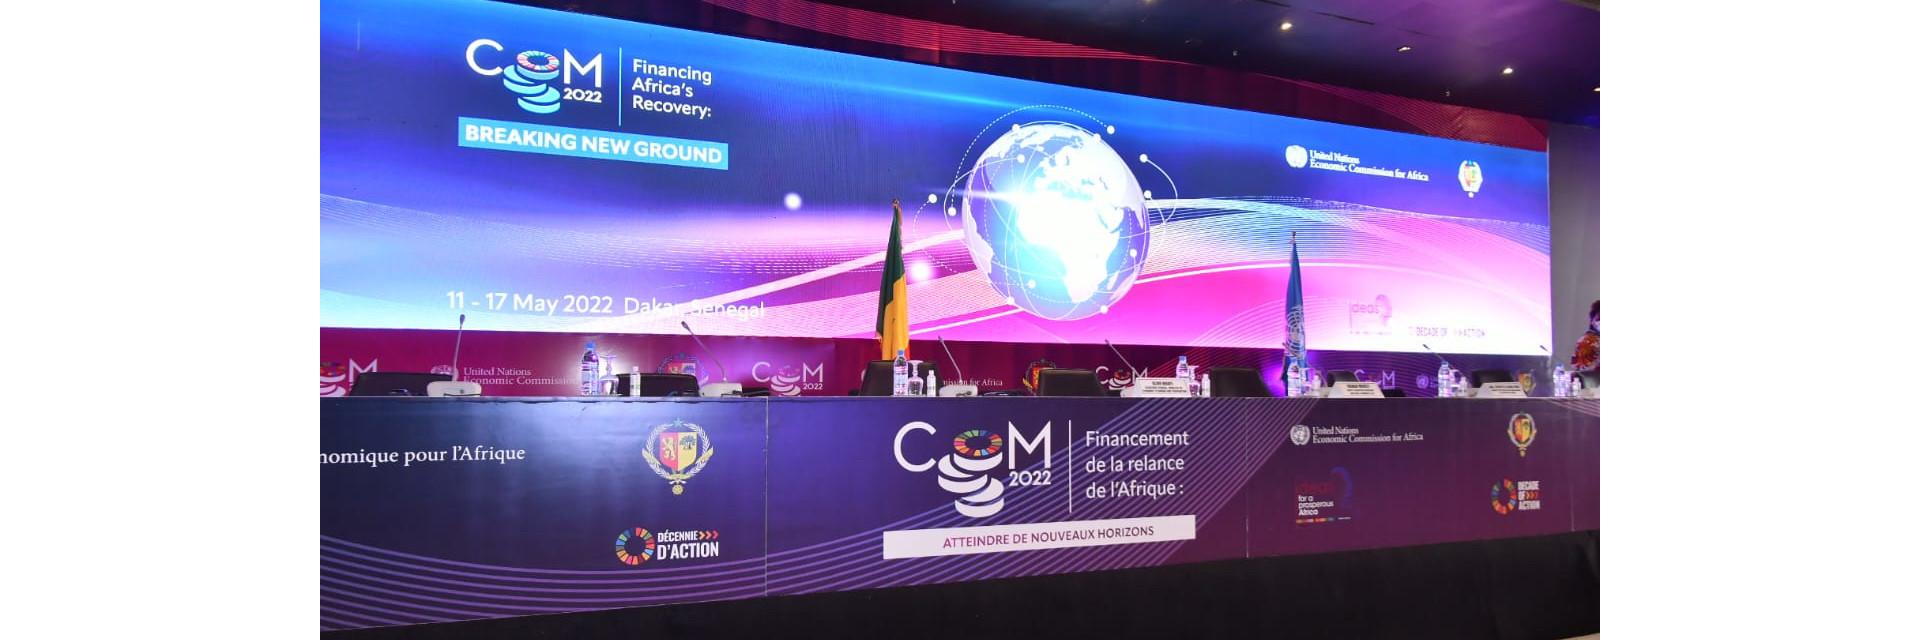 All set for ECA’s Conference of Ministers (CoM2022) in Dakar, Senegal